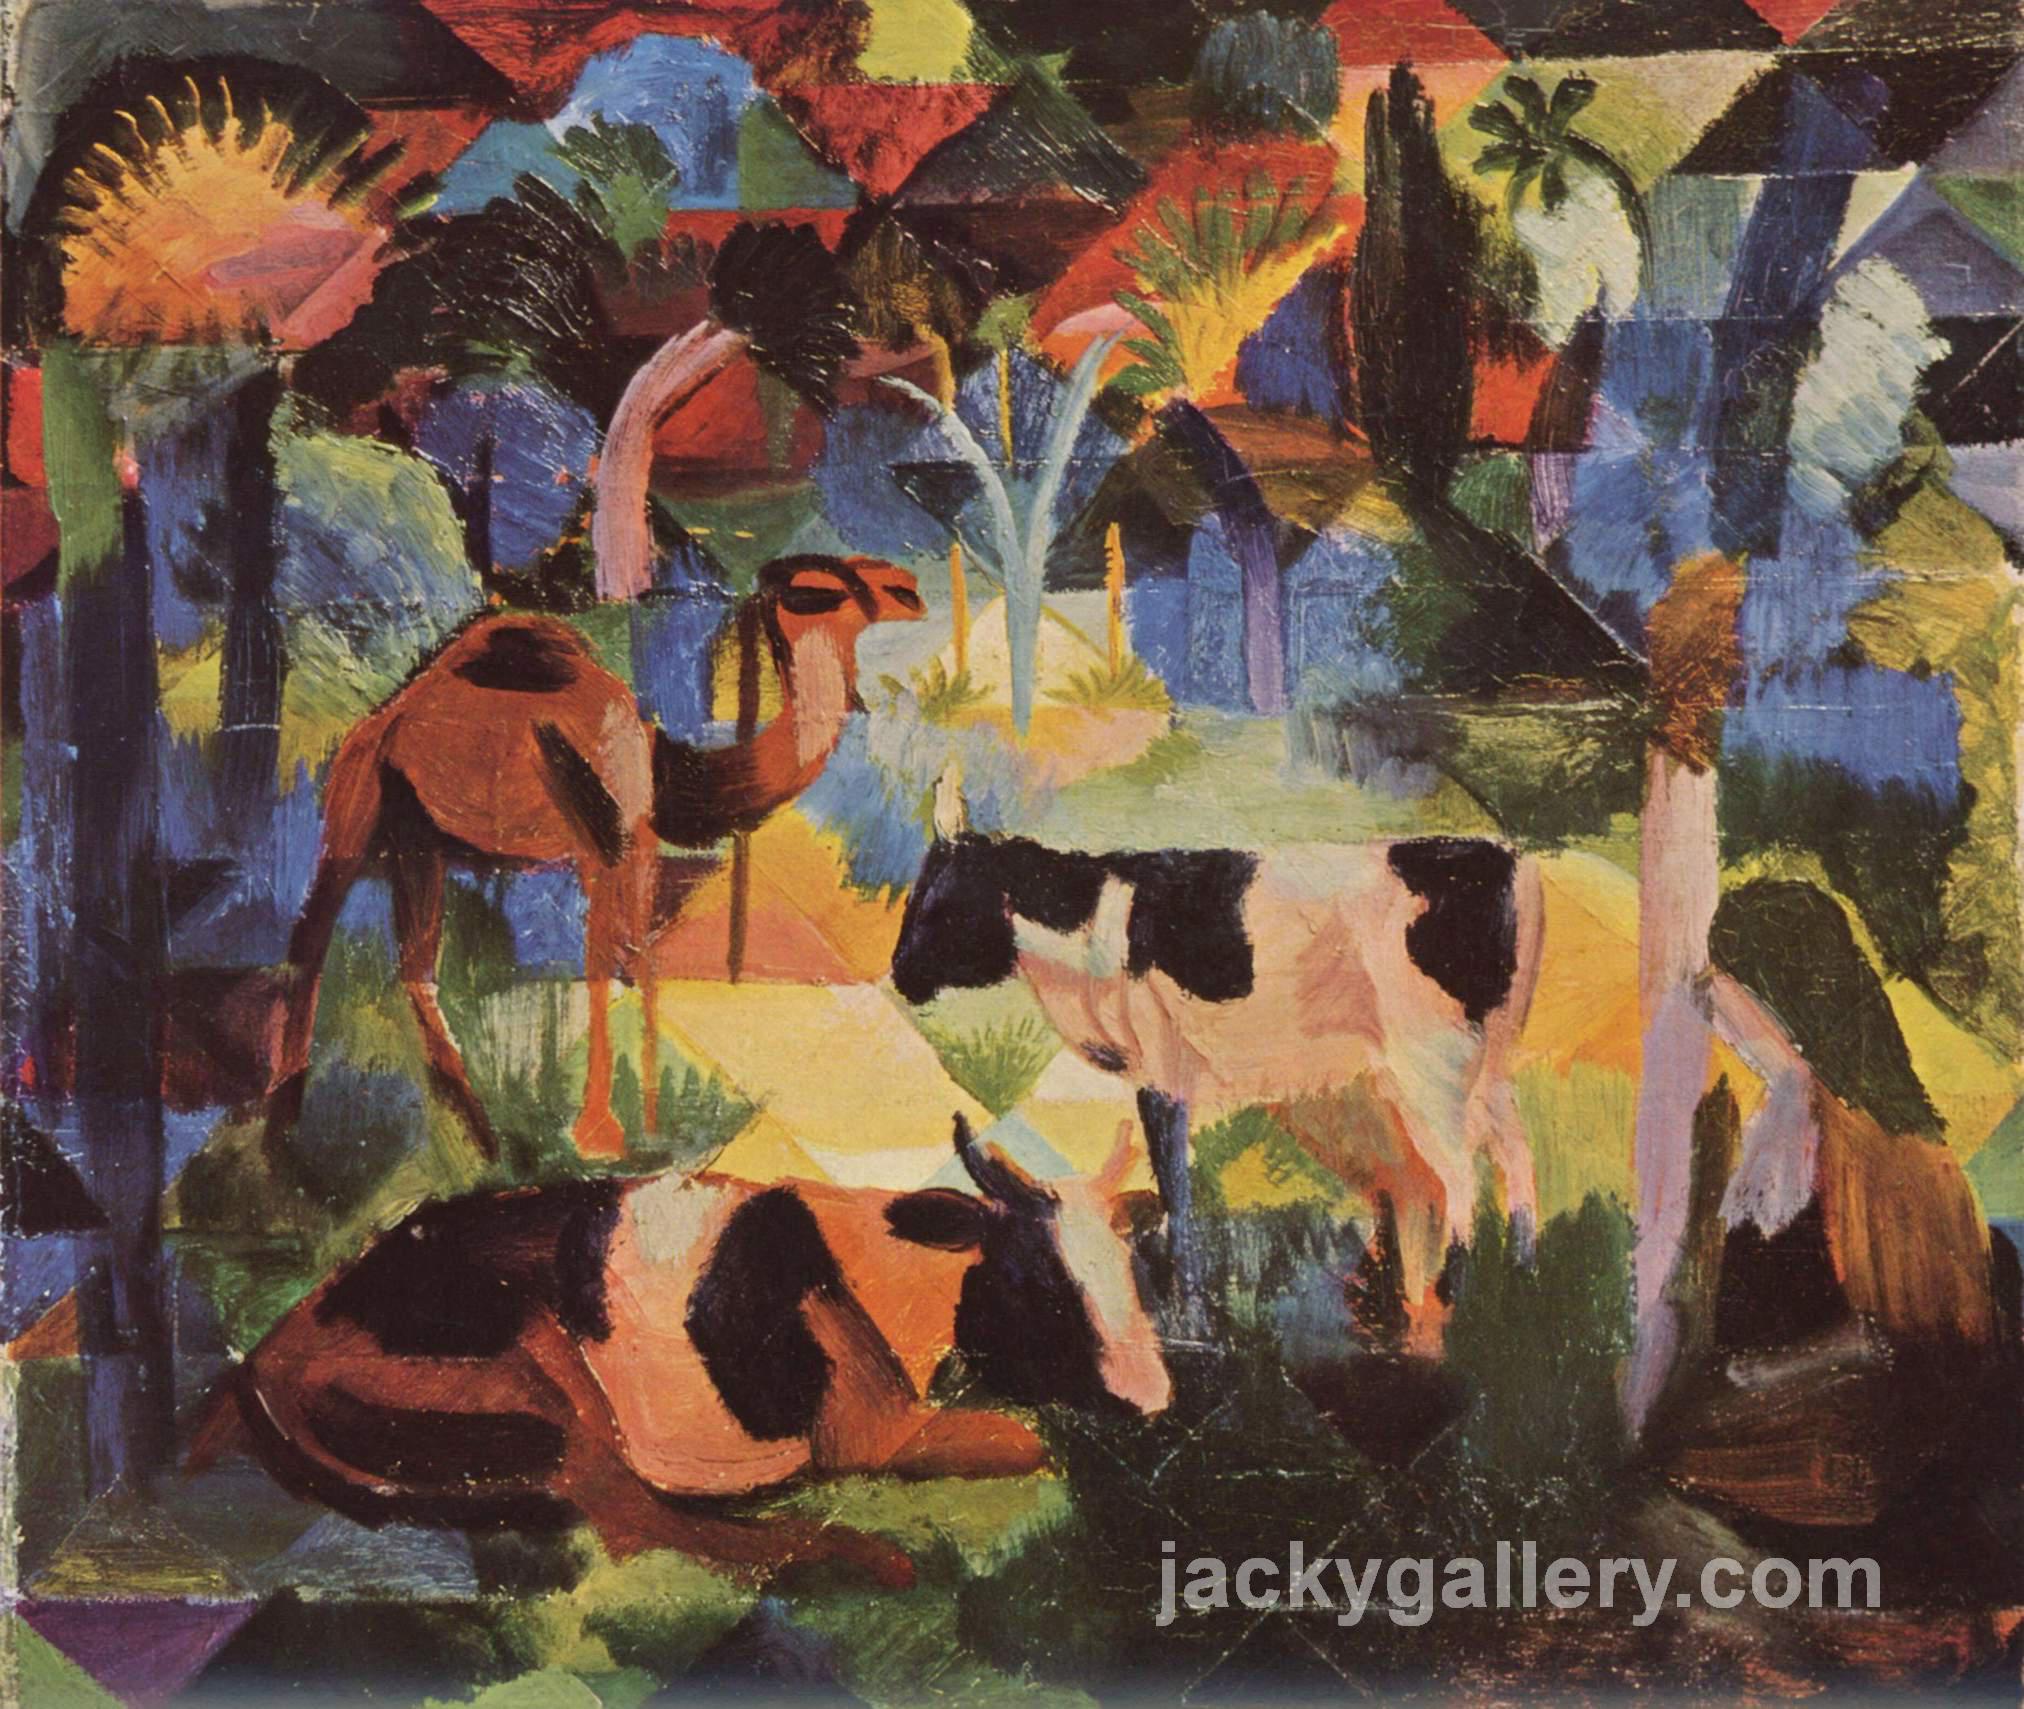 Landscape with Cows and a Camel, August Macke painting